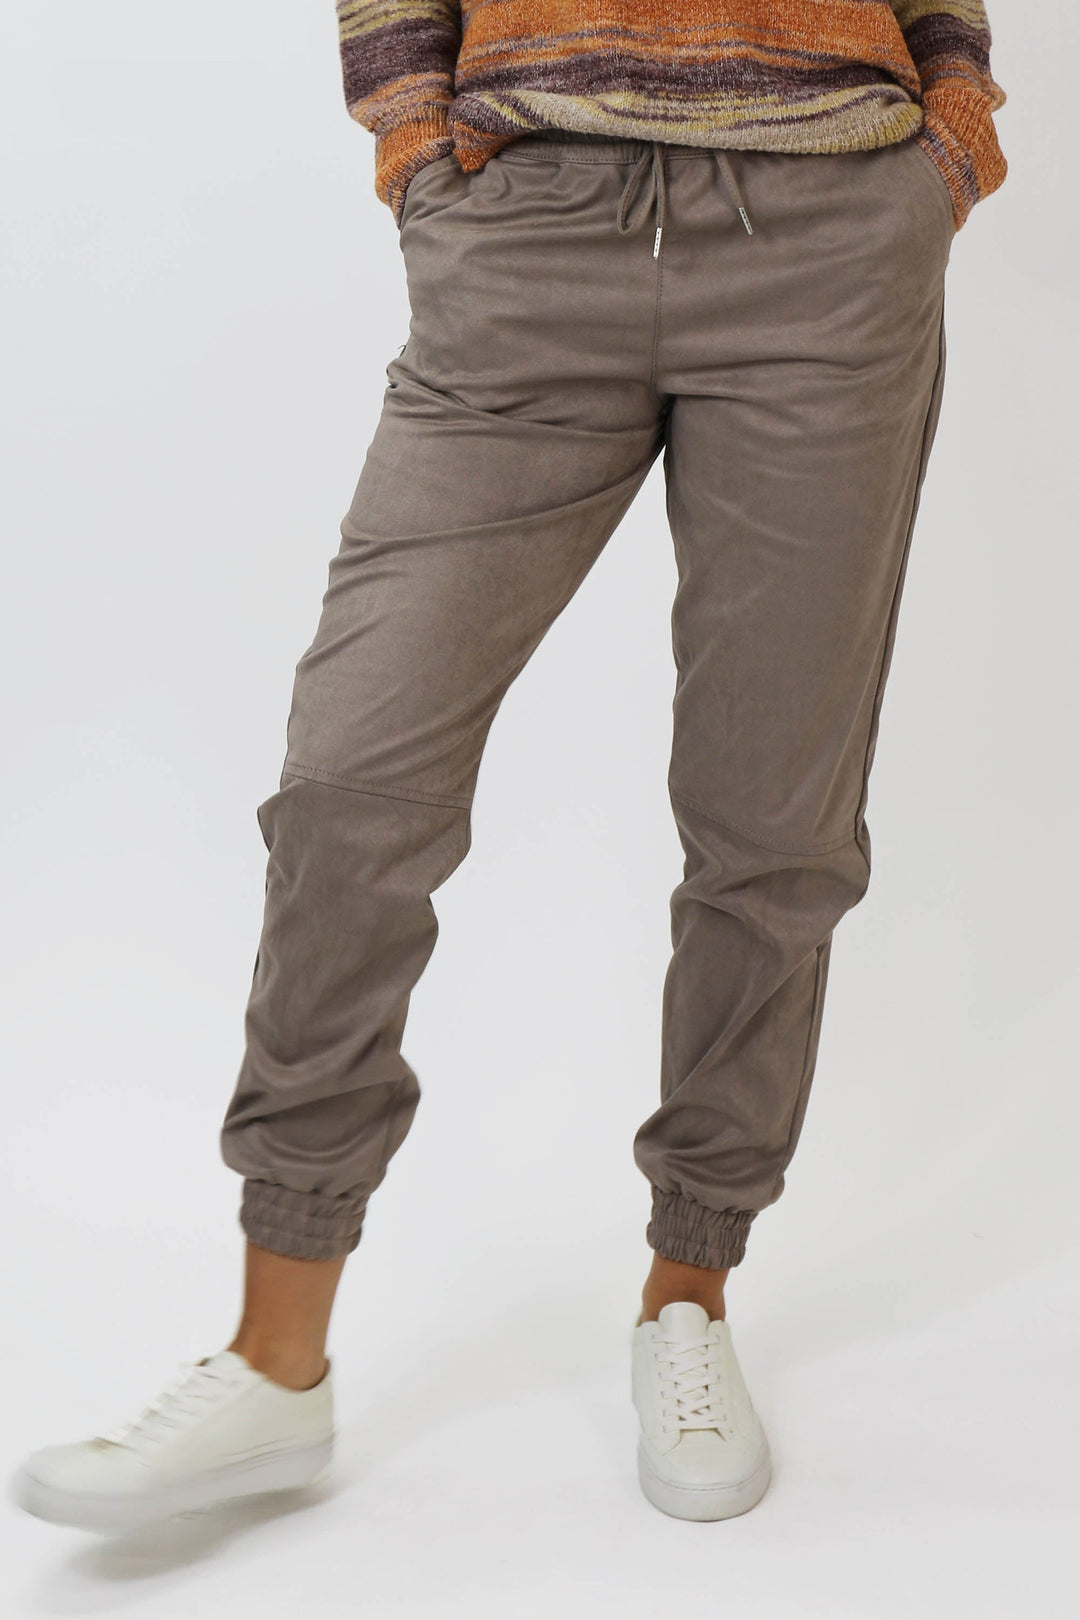 image of a female model wearing a JACEY SUPER HIGHRISE CROPPED CHOCOLATE JOGGER PANTS DEAR JOHN DENIM 